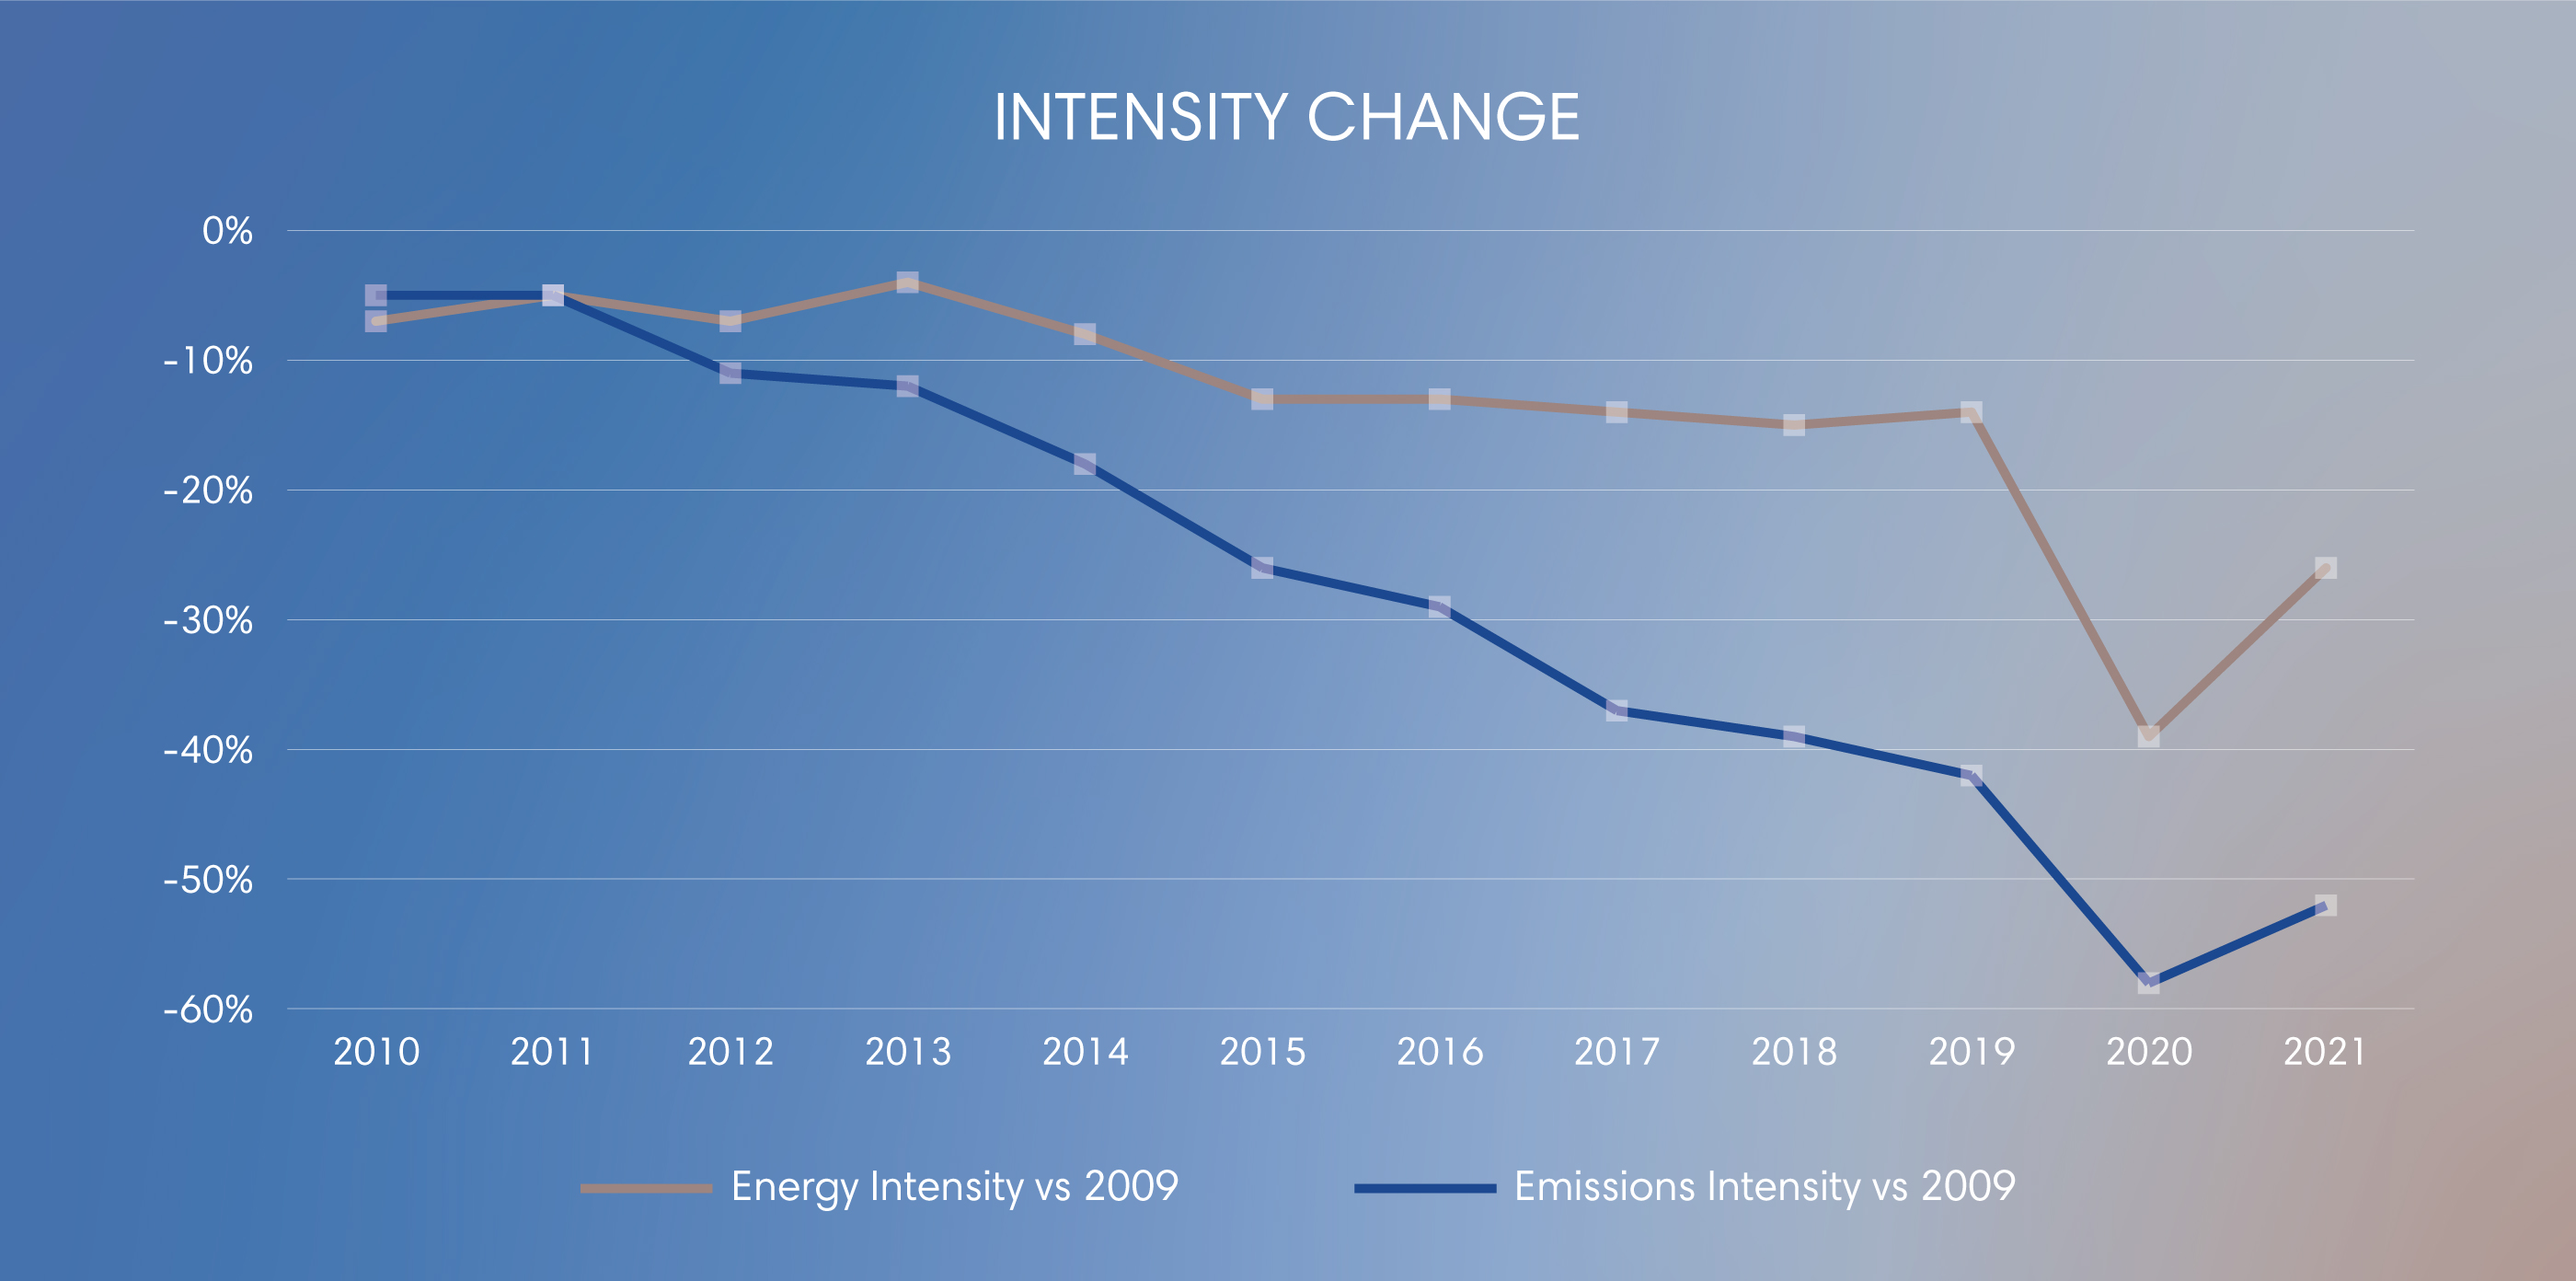 a graph showing the intensity chance for energy an emissions going down from 2009-2020